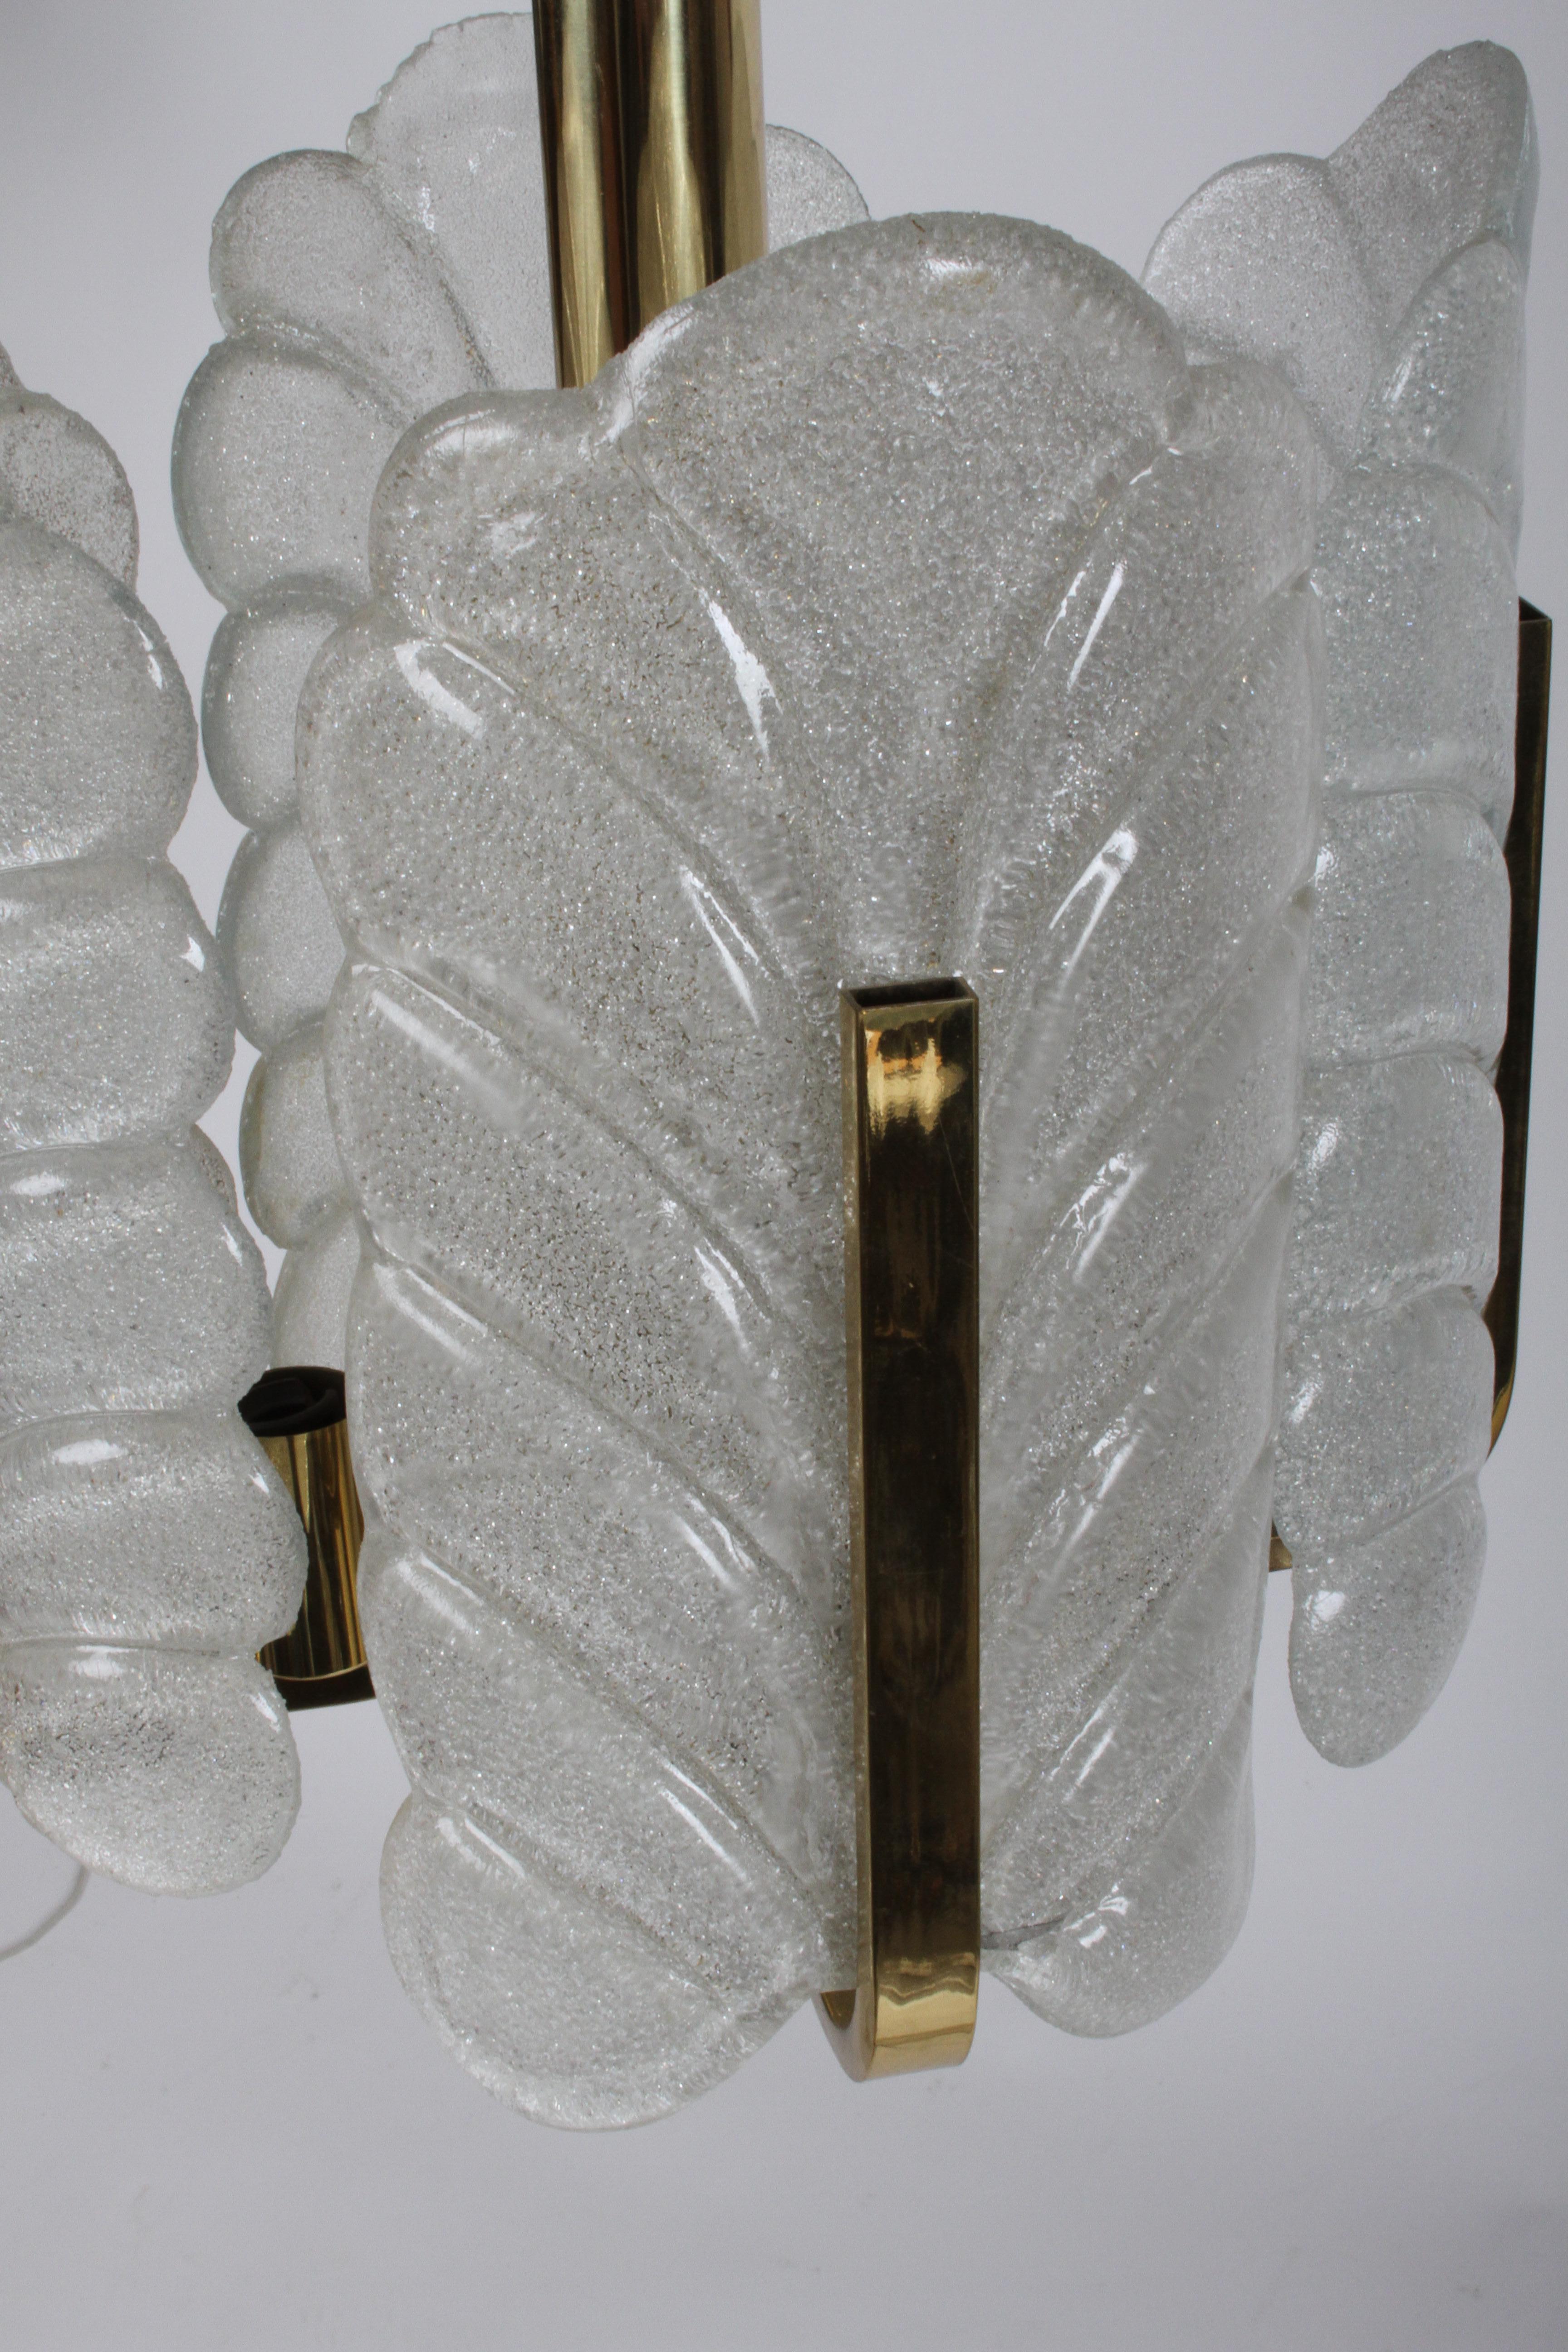 Brass Carl Fagerlund Chandelier for Orrefors Sweden Textured Acanthus Glass Leaves  For Sale